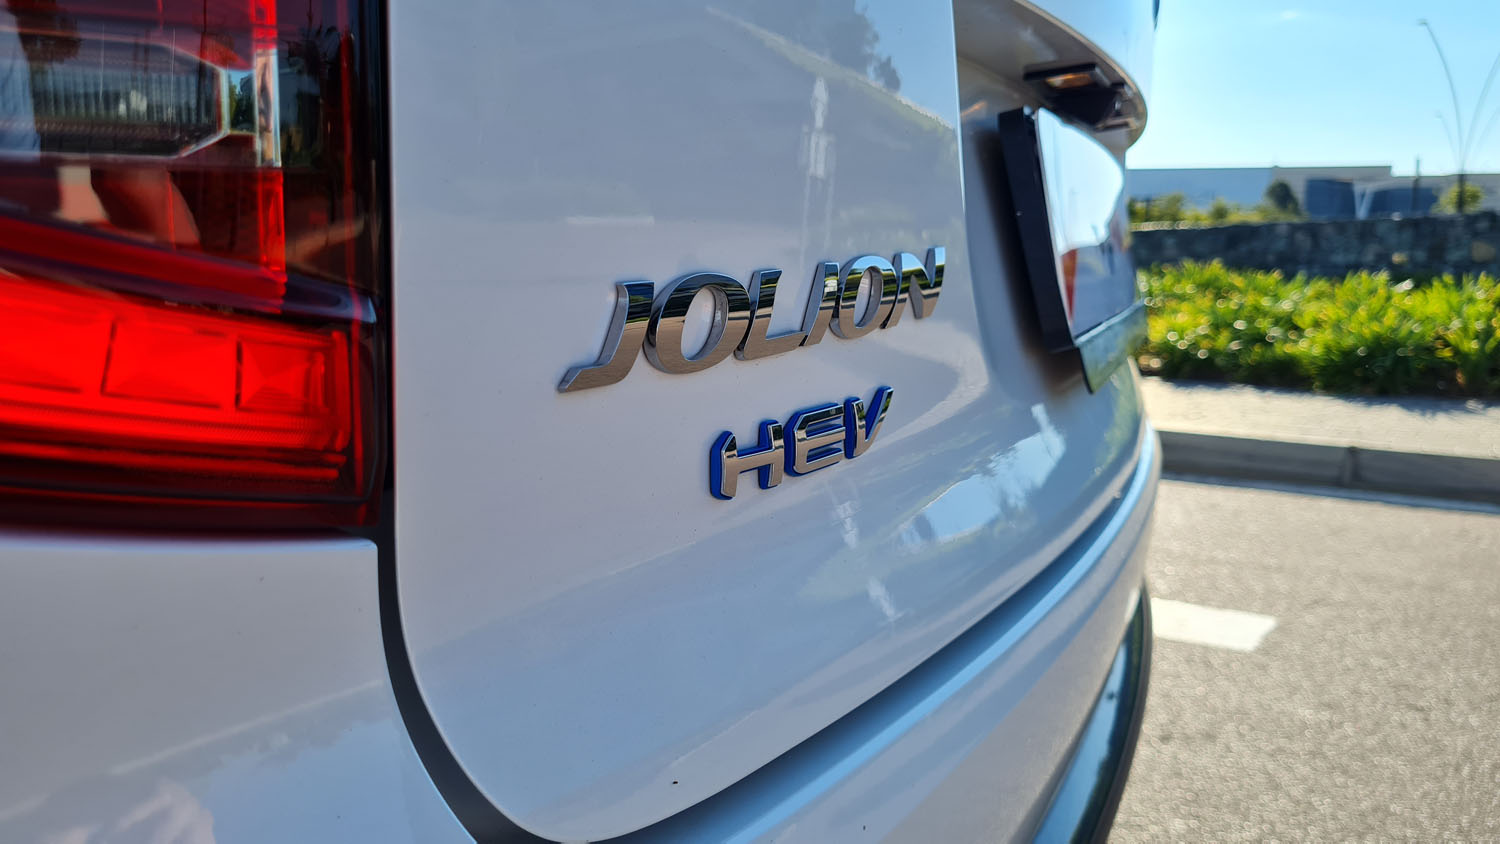 haval, haval jolion, haval jolion hev, haval jolion hev review – the future for south africa